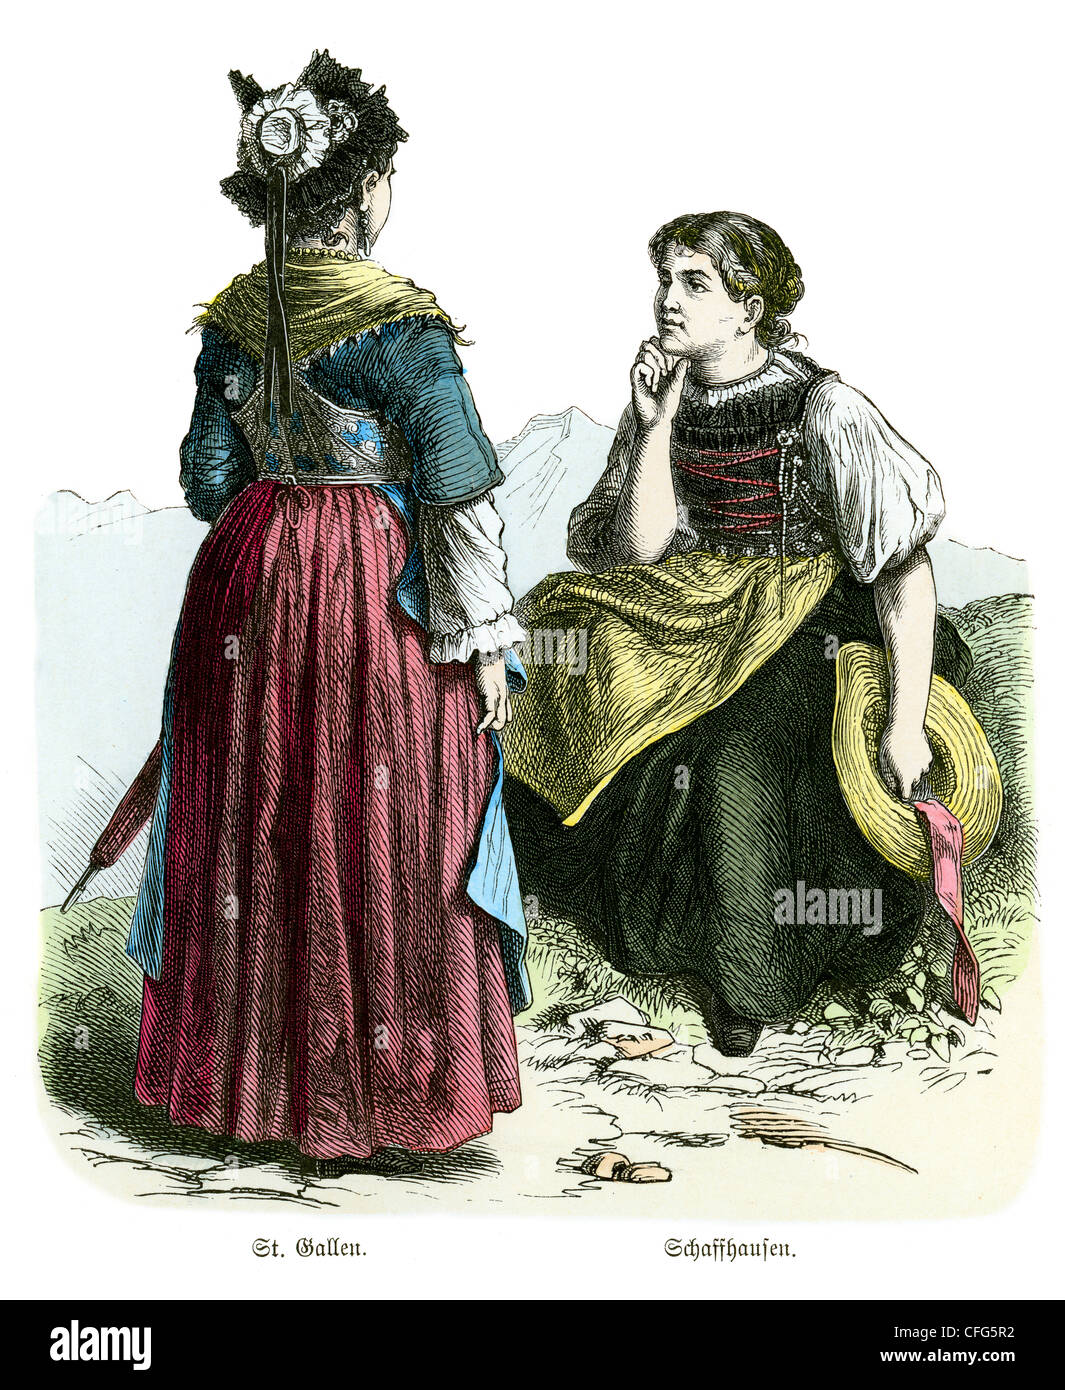 A couple of women in the traditional costume of Switzerland of the 19th Century. St Gallen and Schaffahausen. Stock Photo